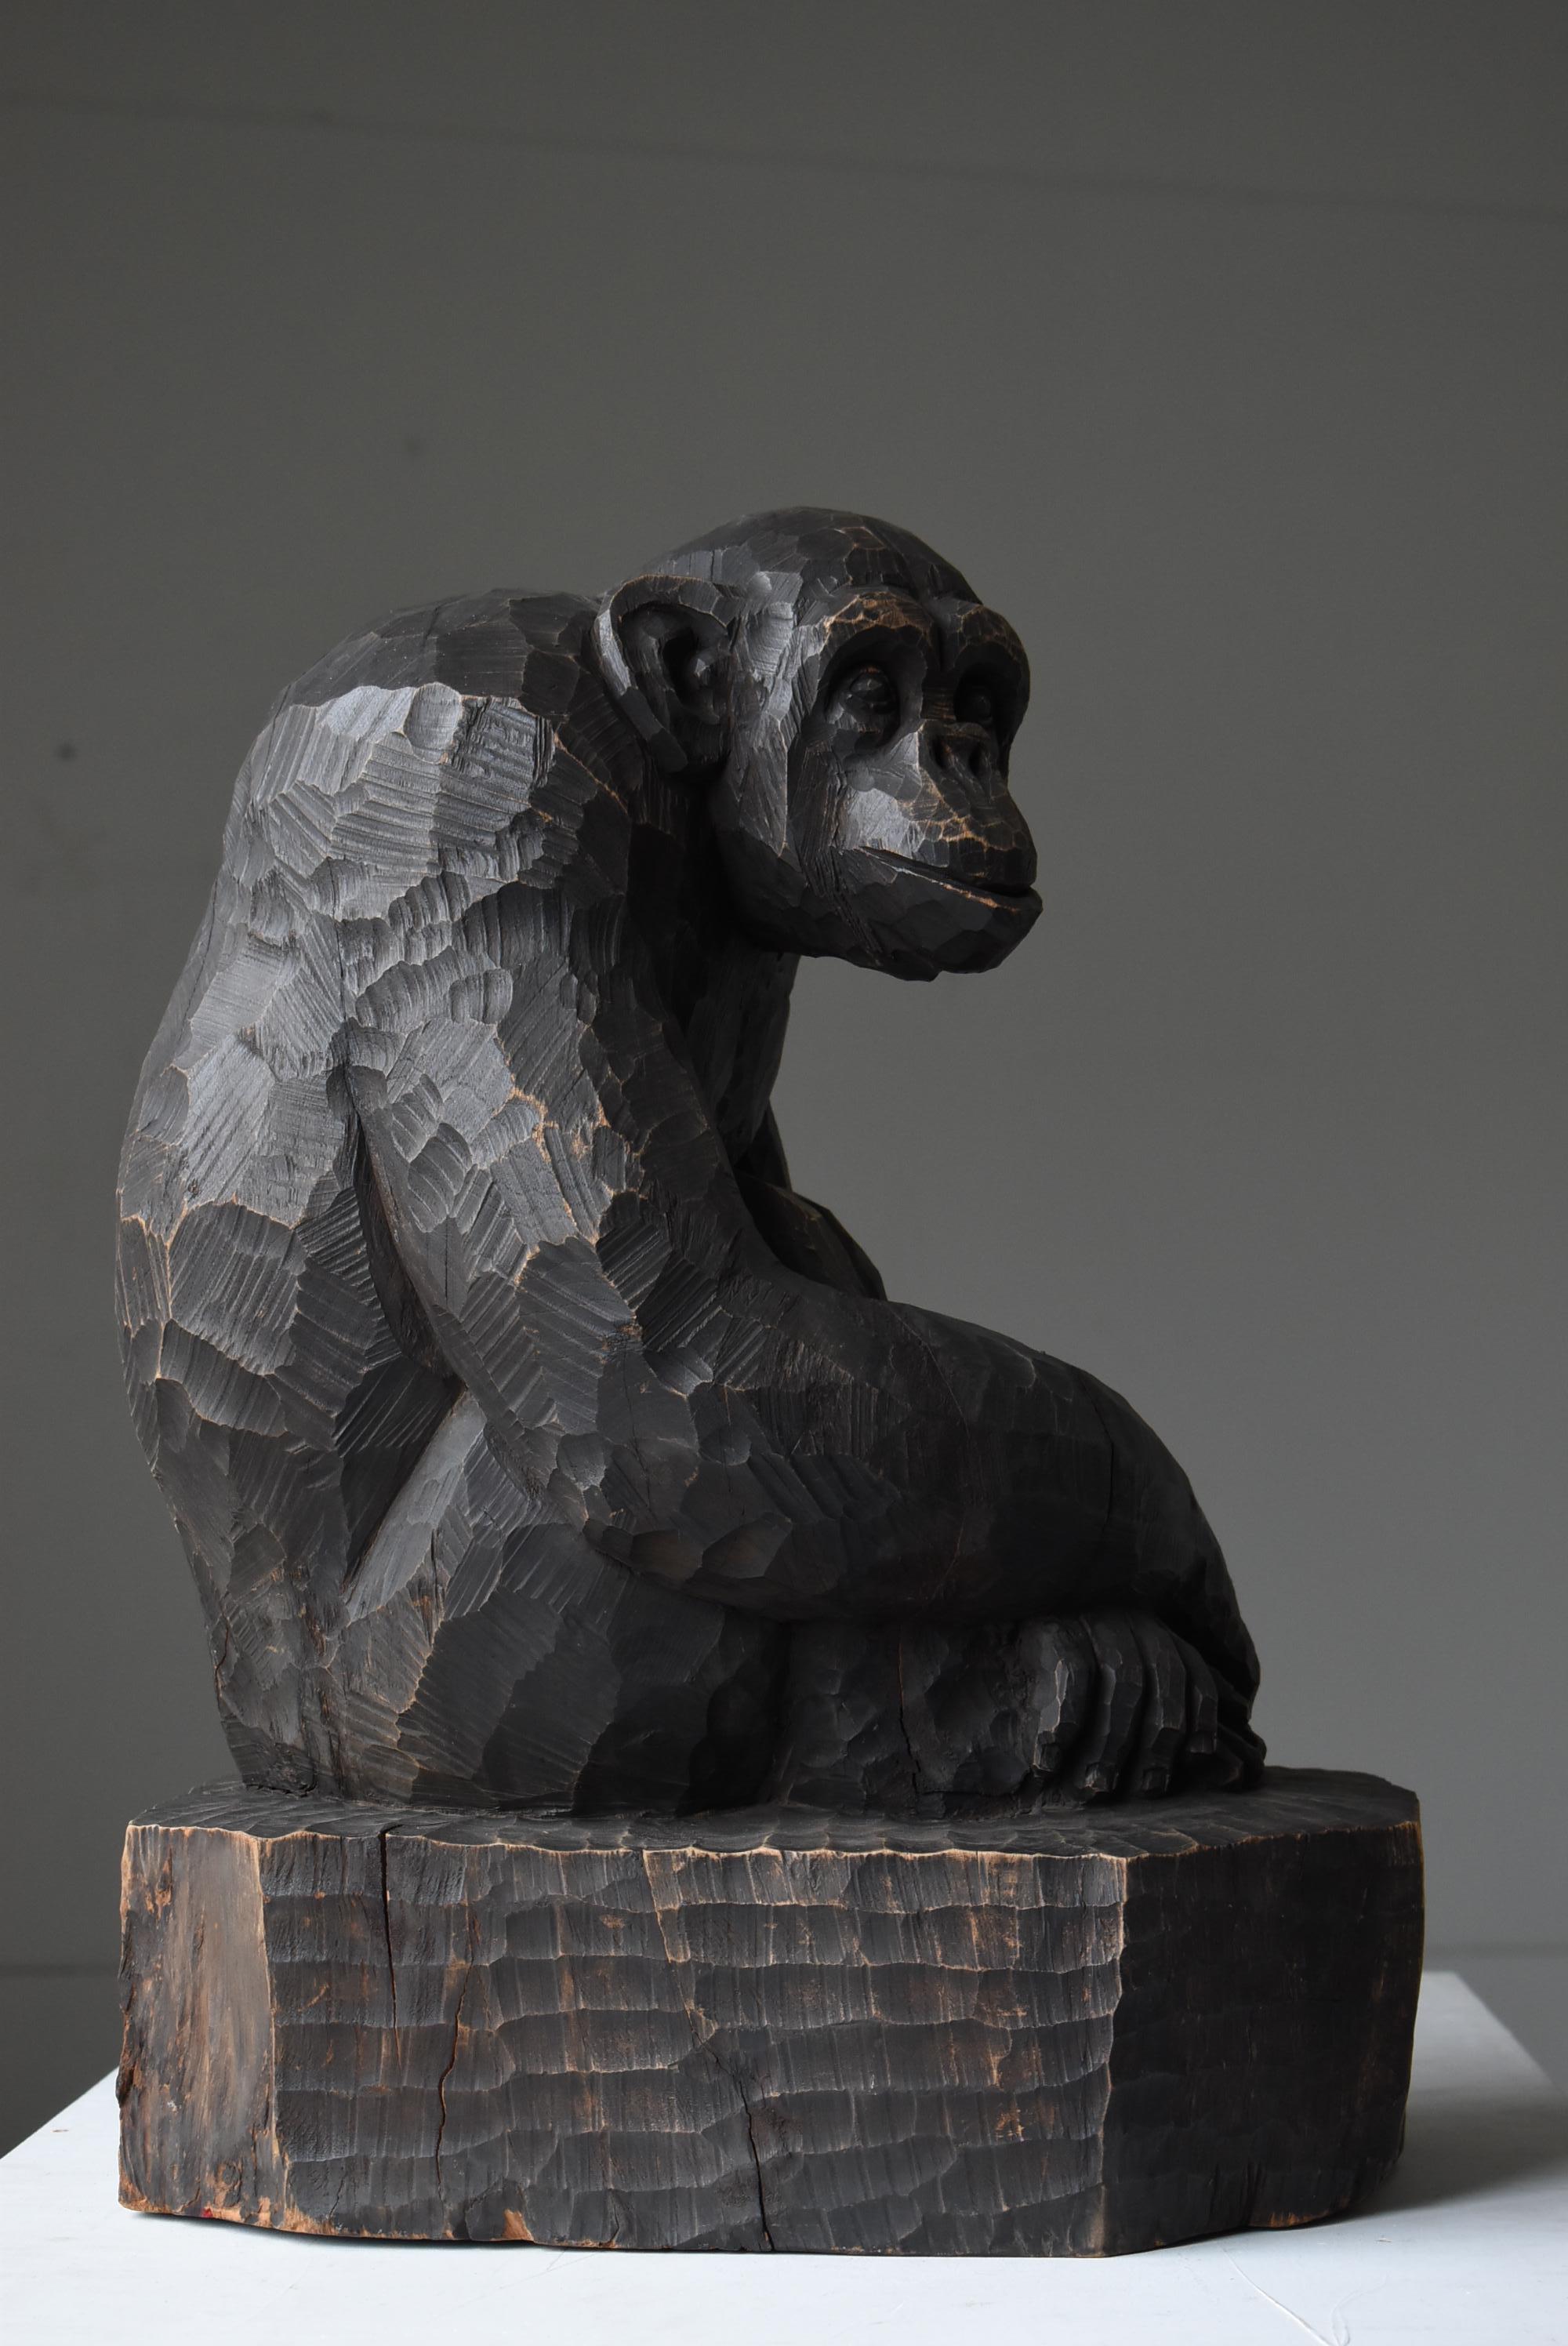 Japanese Old Wood Sculpture Chimpanzee 1940s-1960s / Wood Carving Mingei  For Sale 8